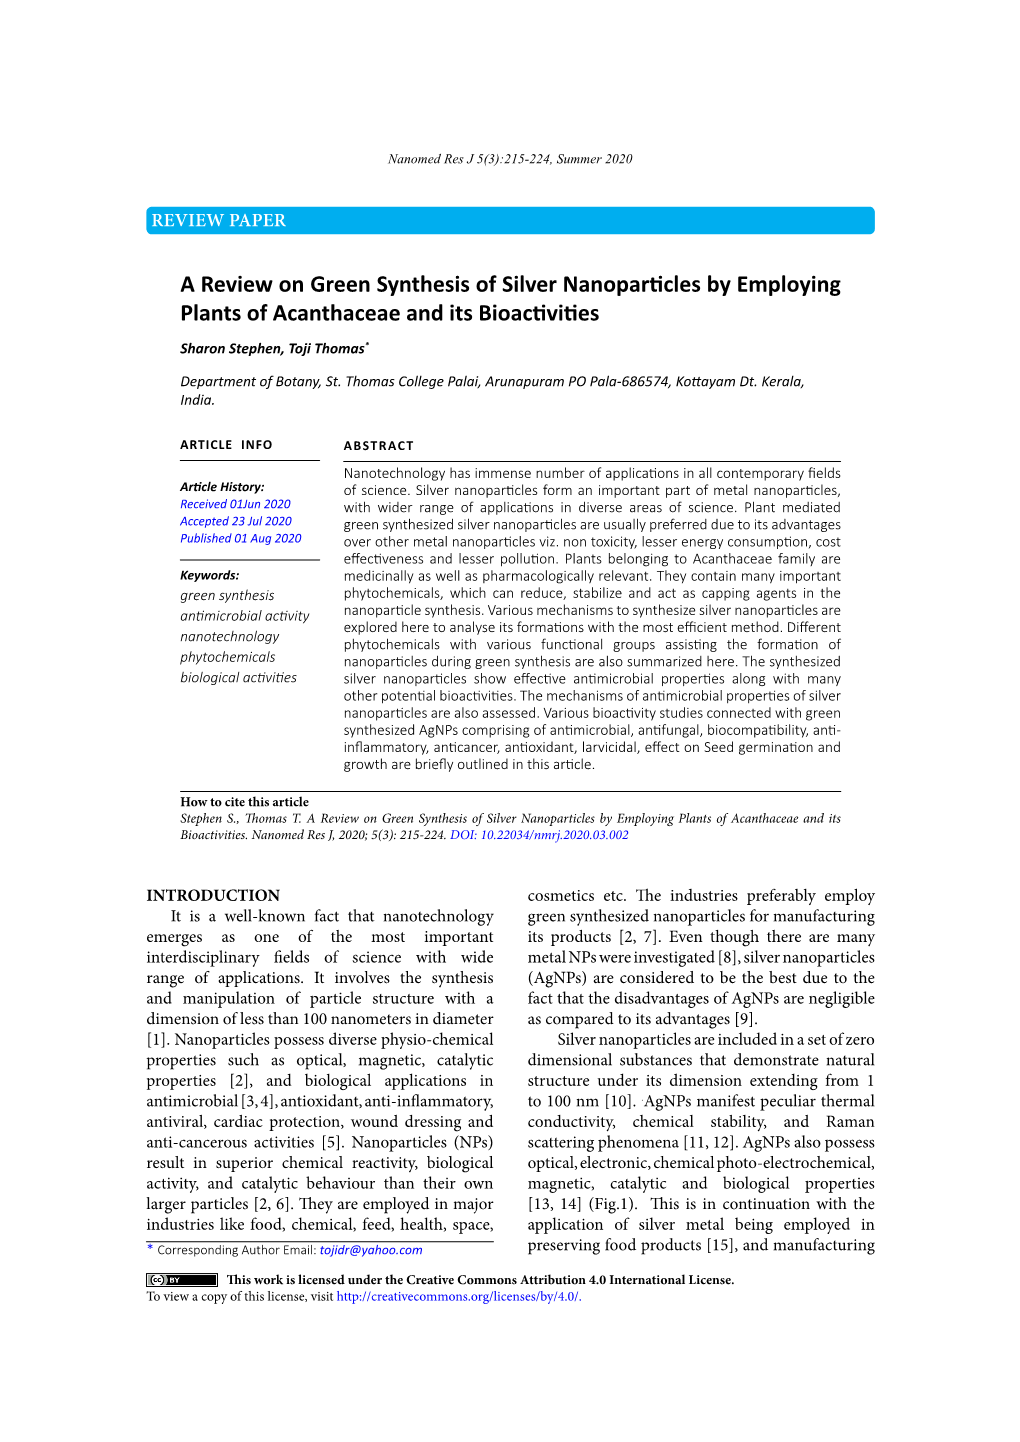 A Review on Green Synthesis of Silver Nanoparticles by Employing Plants of Acanthaceae and Its Bioactivities Sharon Stephen, Toji Thomas*